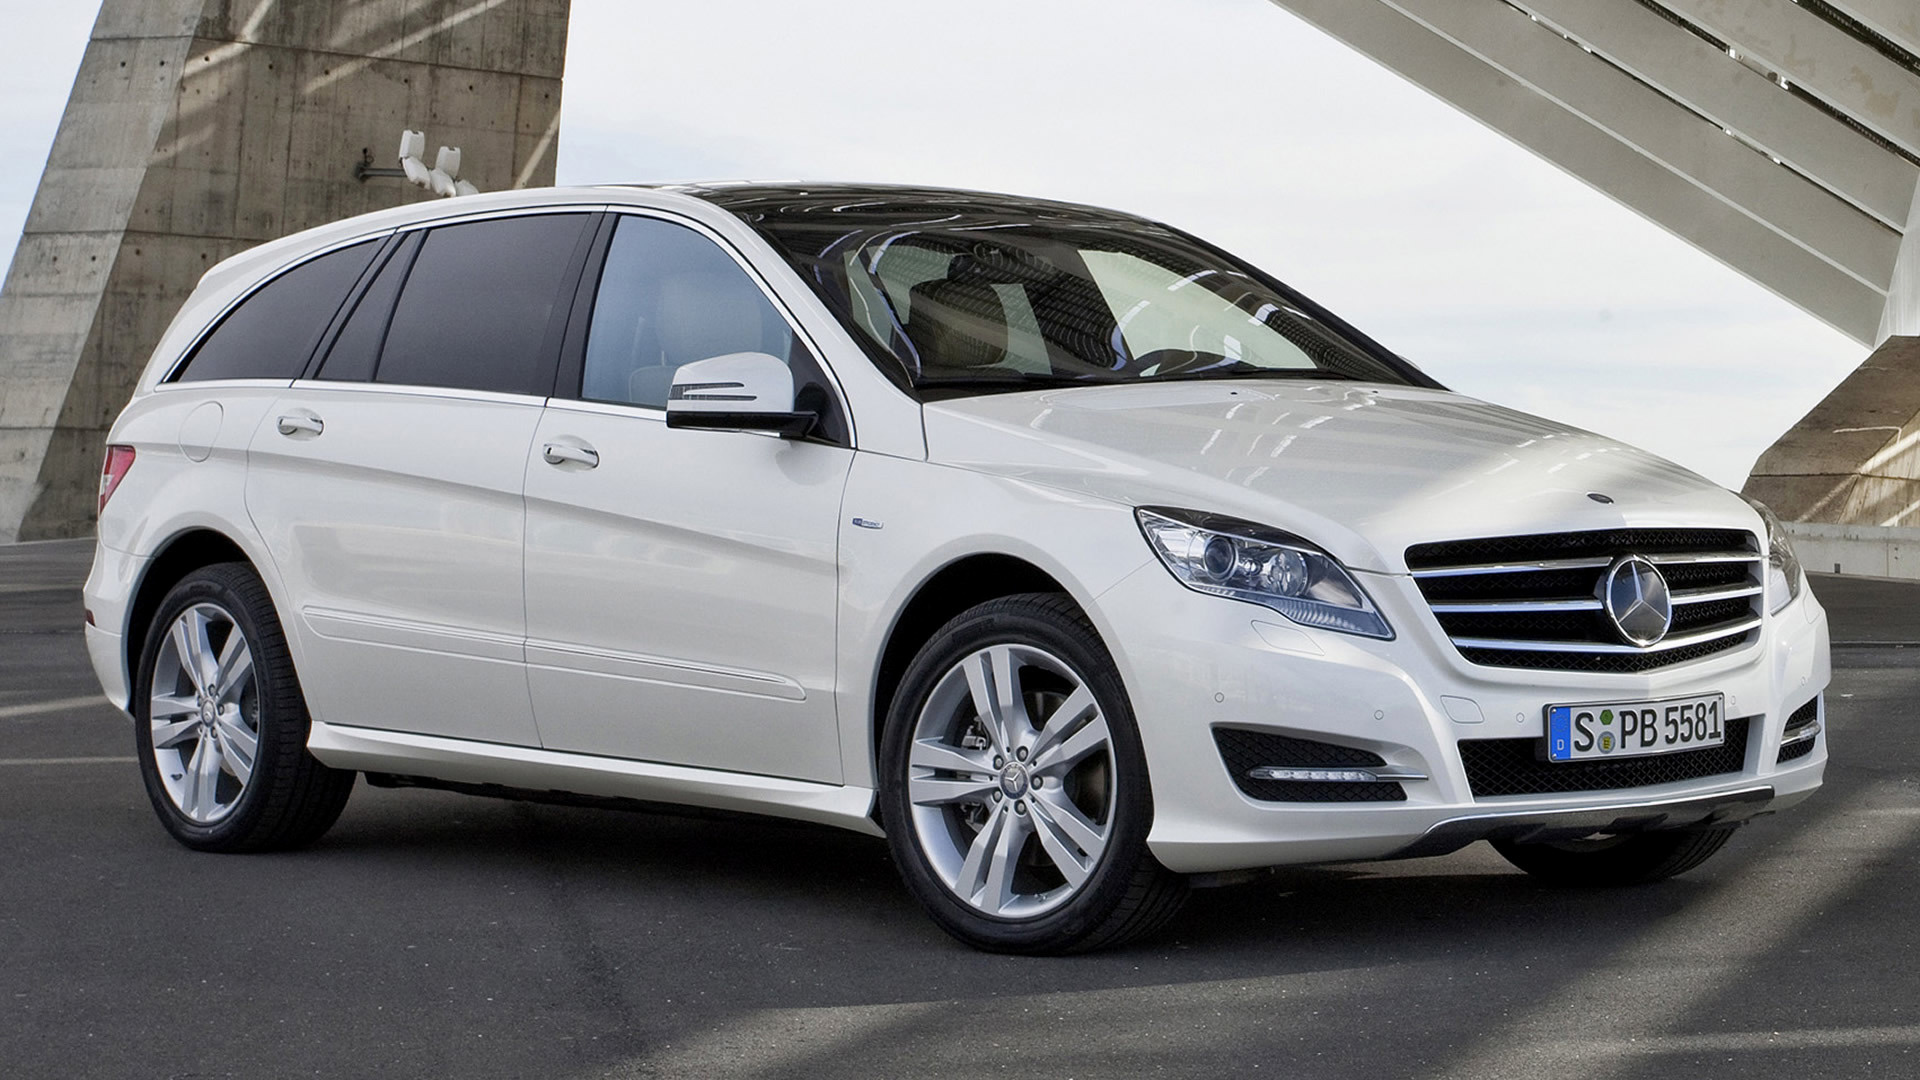 2010 Mercedes-Benz R-Class [Long] - Wallpapers and HD Images | Car Pixel